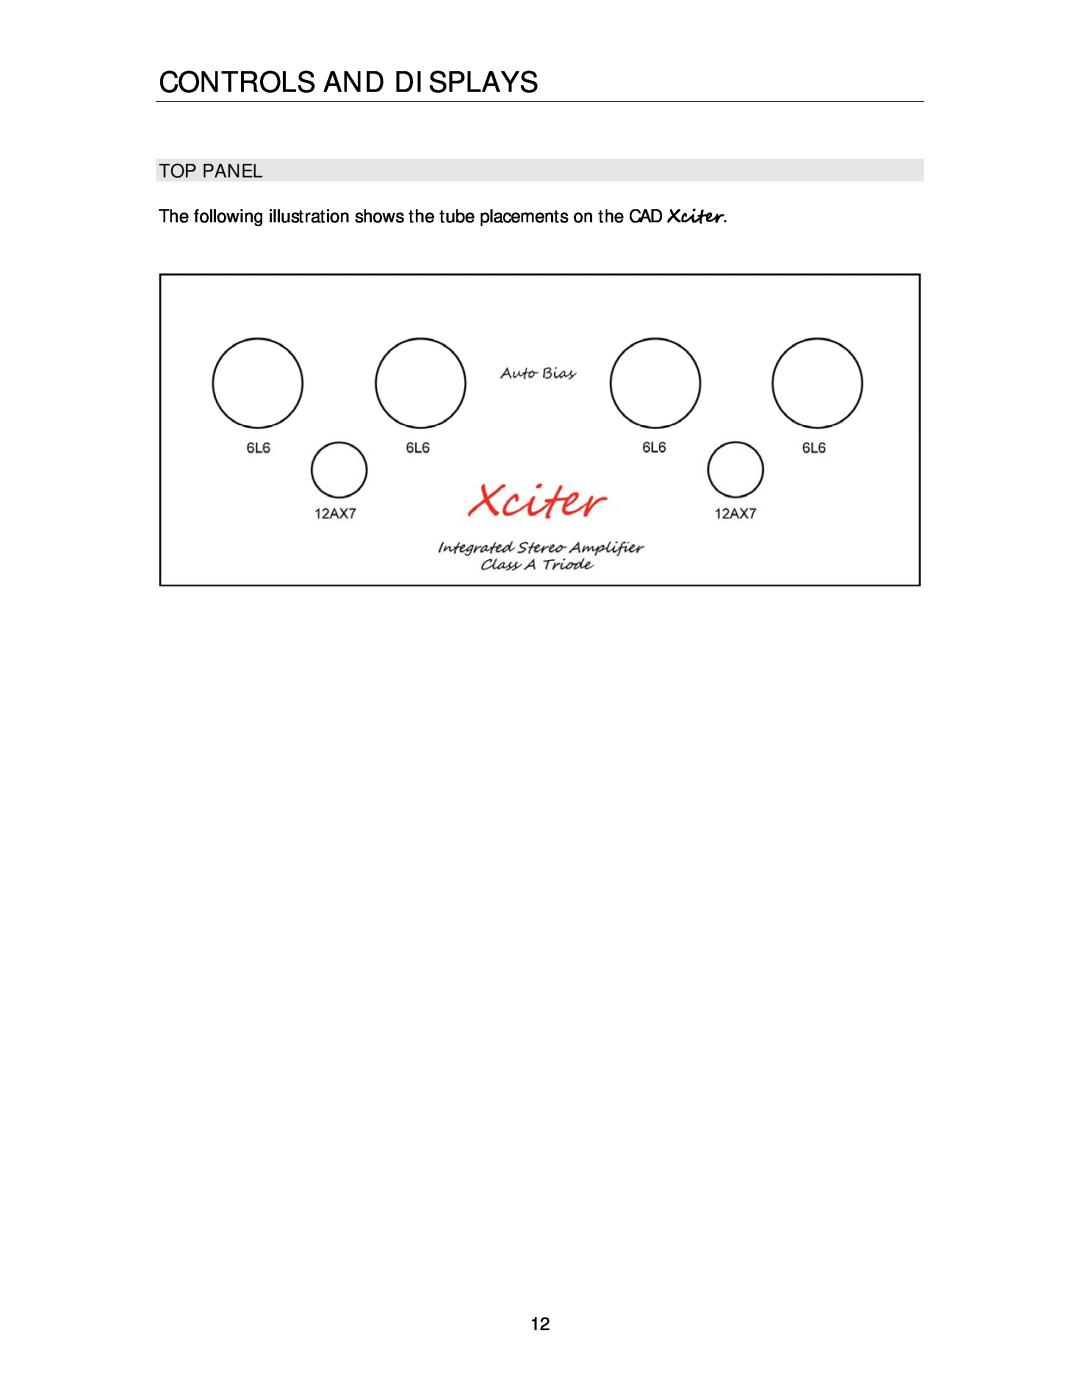 Cary Audio Design Xciter owner manual Top Panel, Controls And Displays 